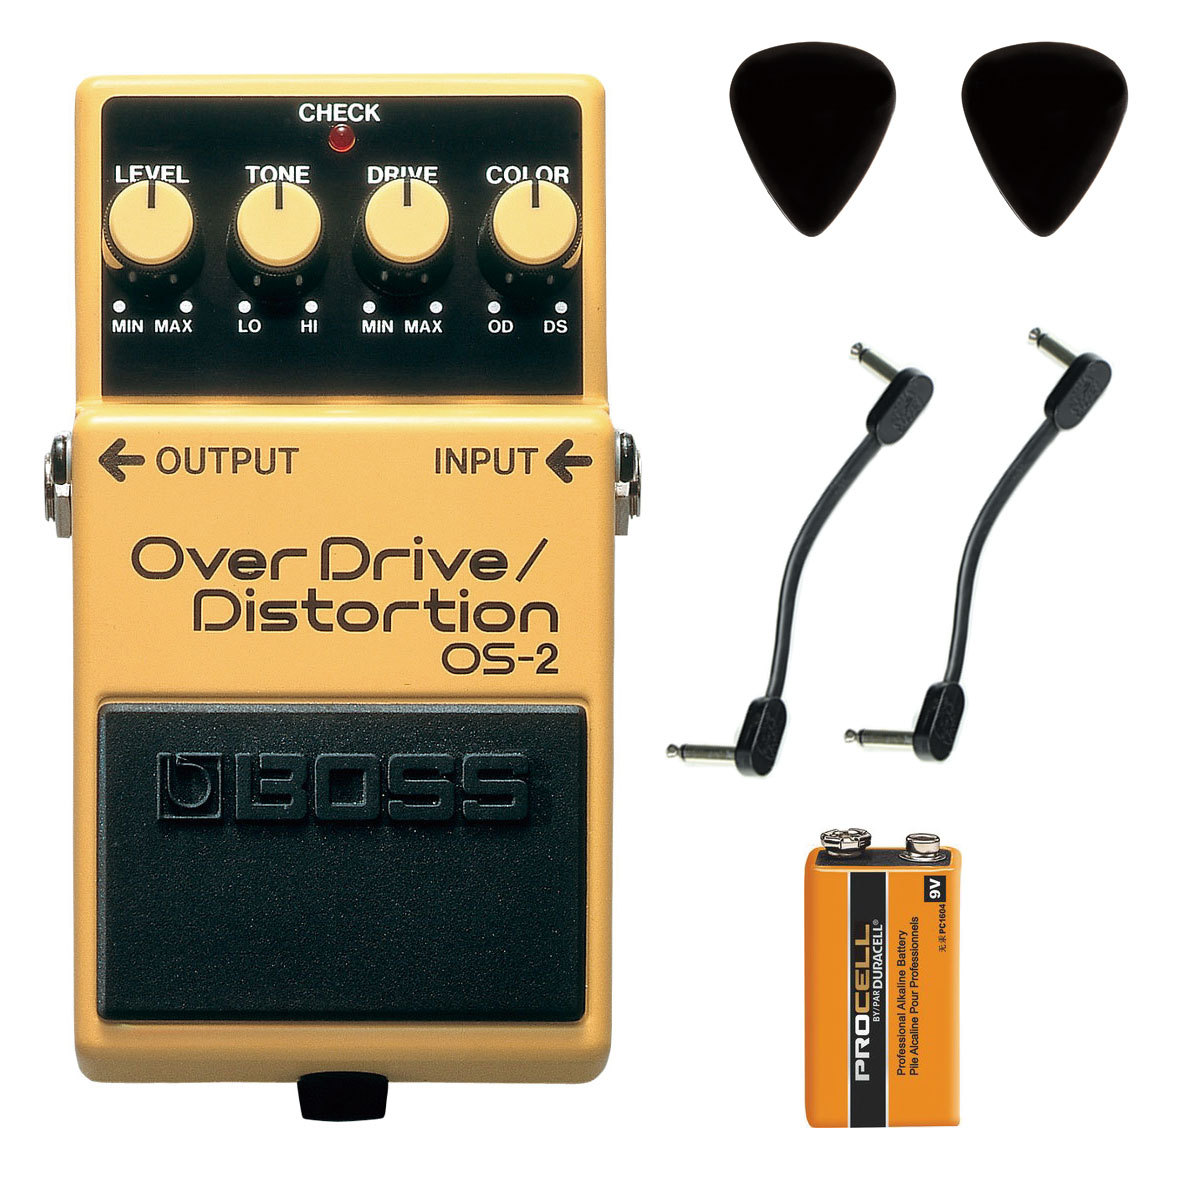 BOSS OS-2 Over Drive / Distortion 【パッチケーブル２本+PROCELL+